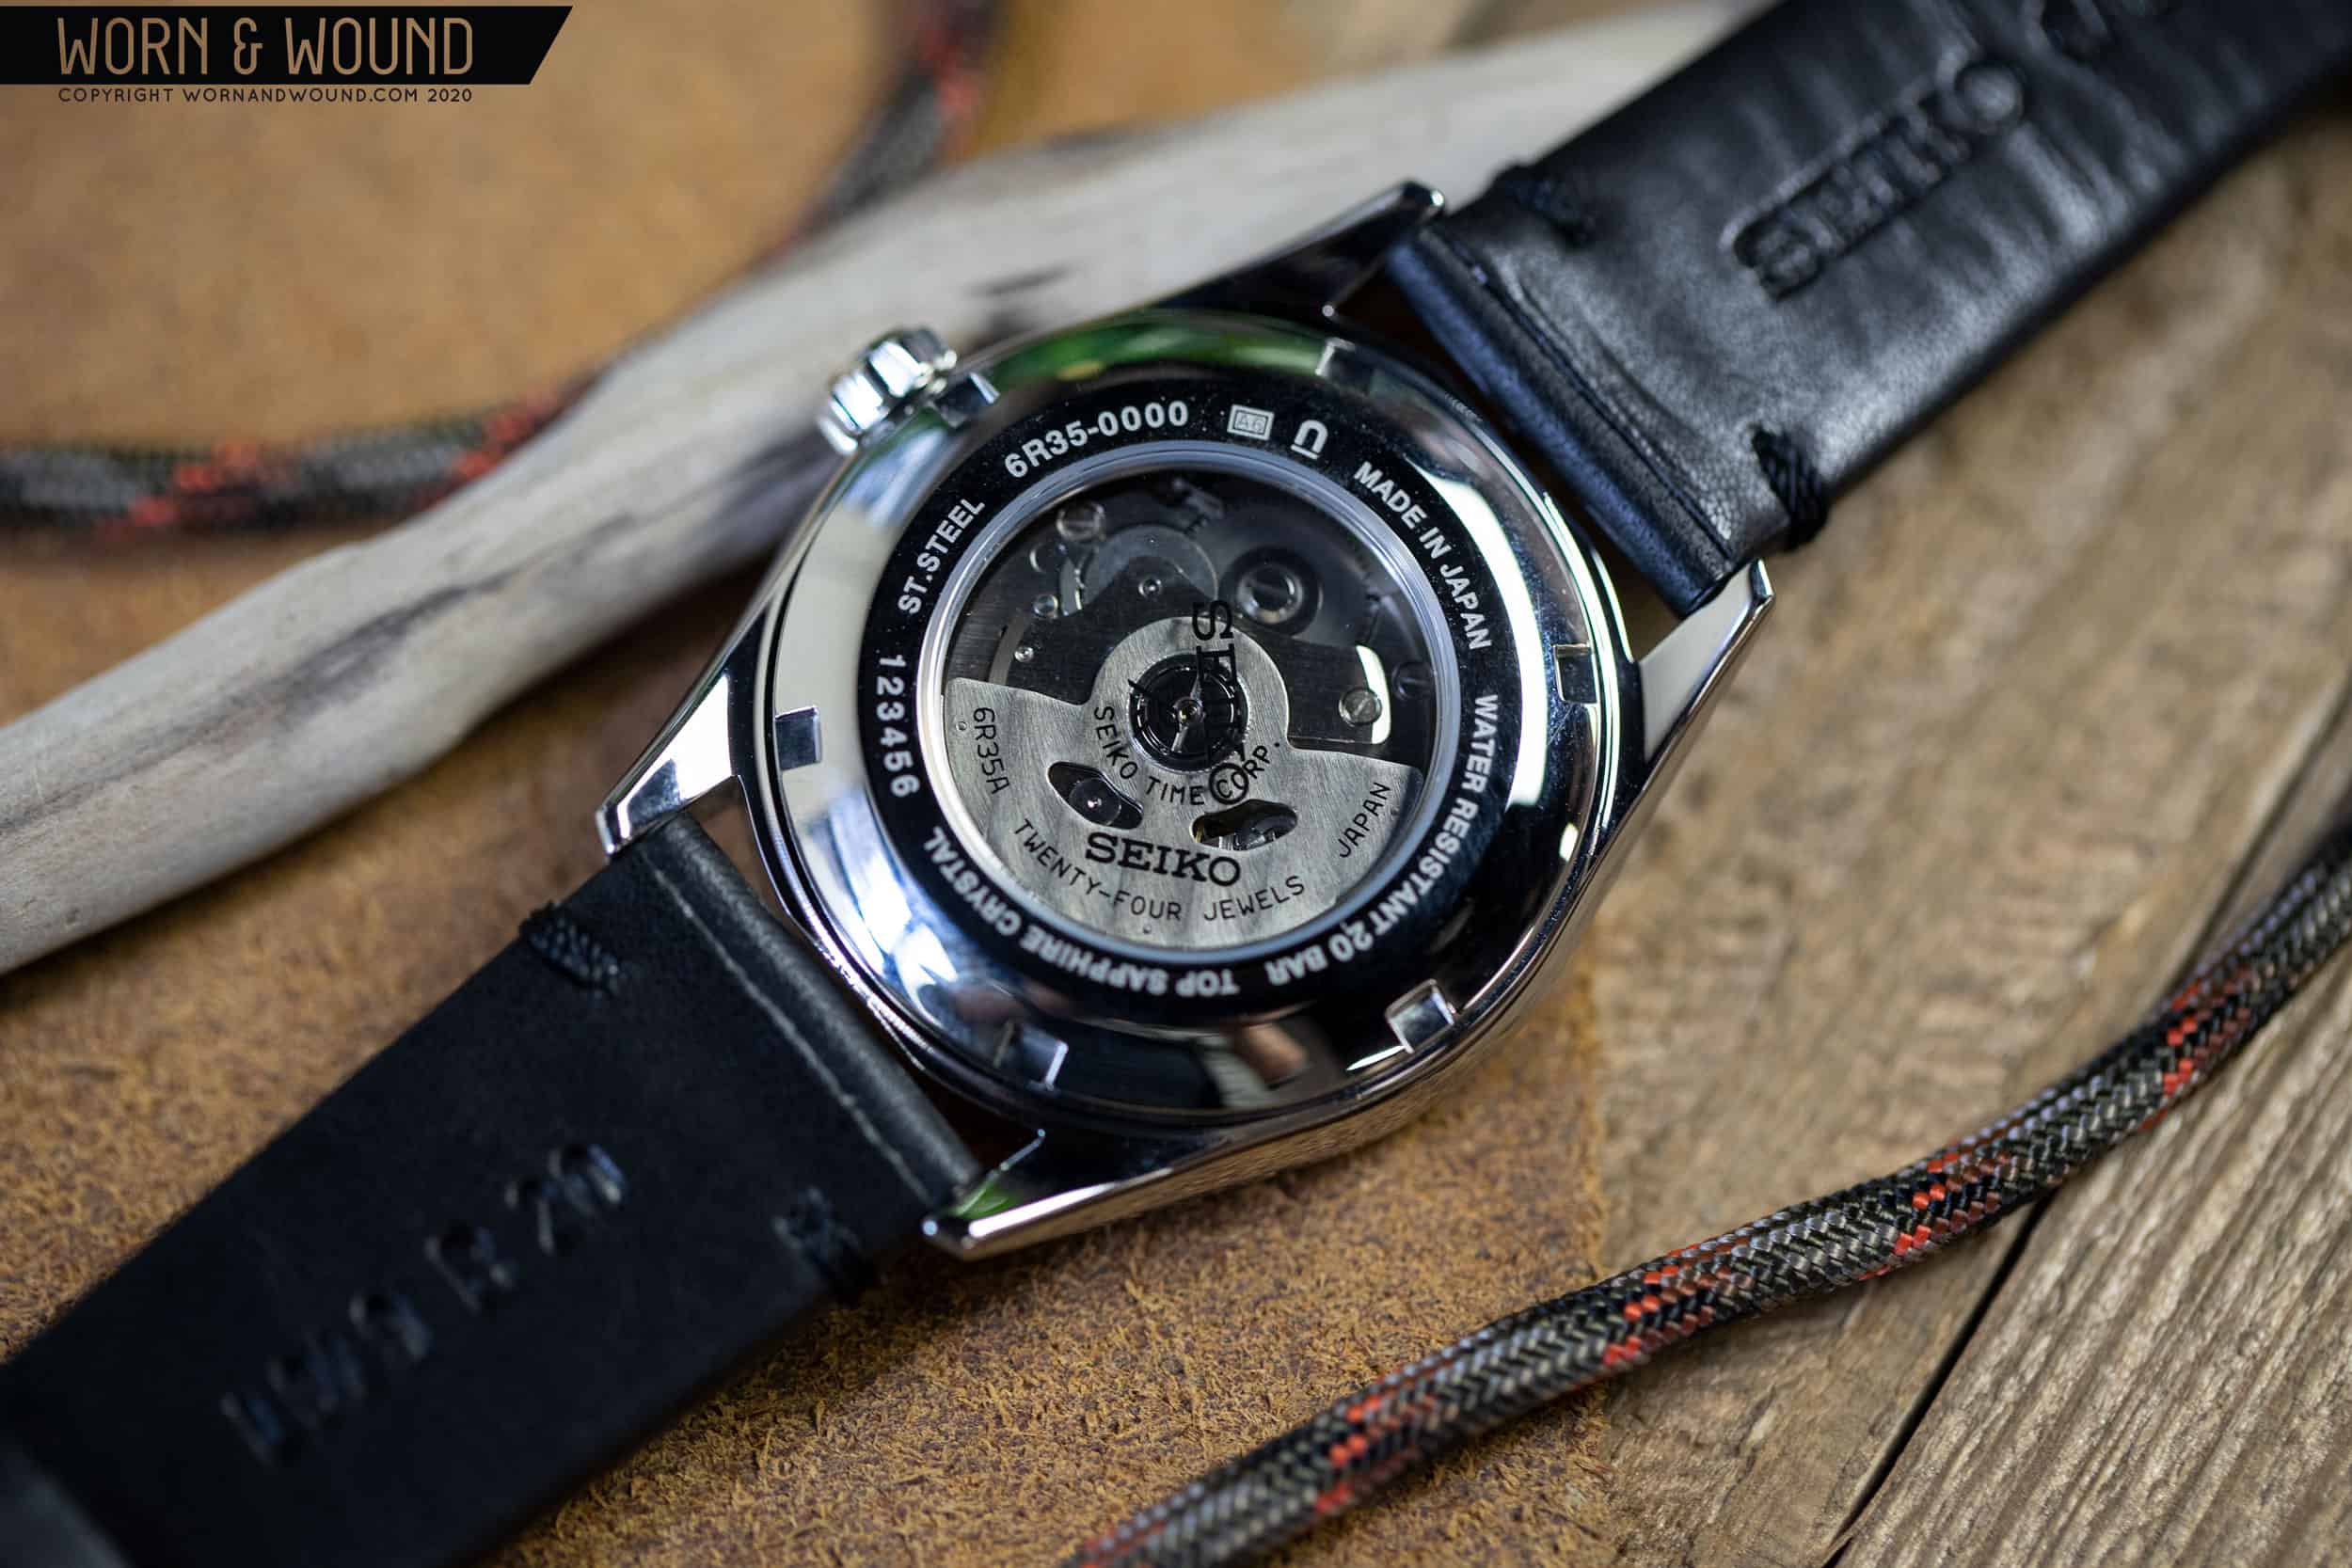 First Look: Seiko Expands their Alpinist Line with a New, Smaller